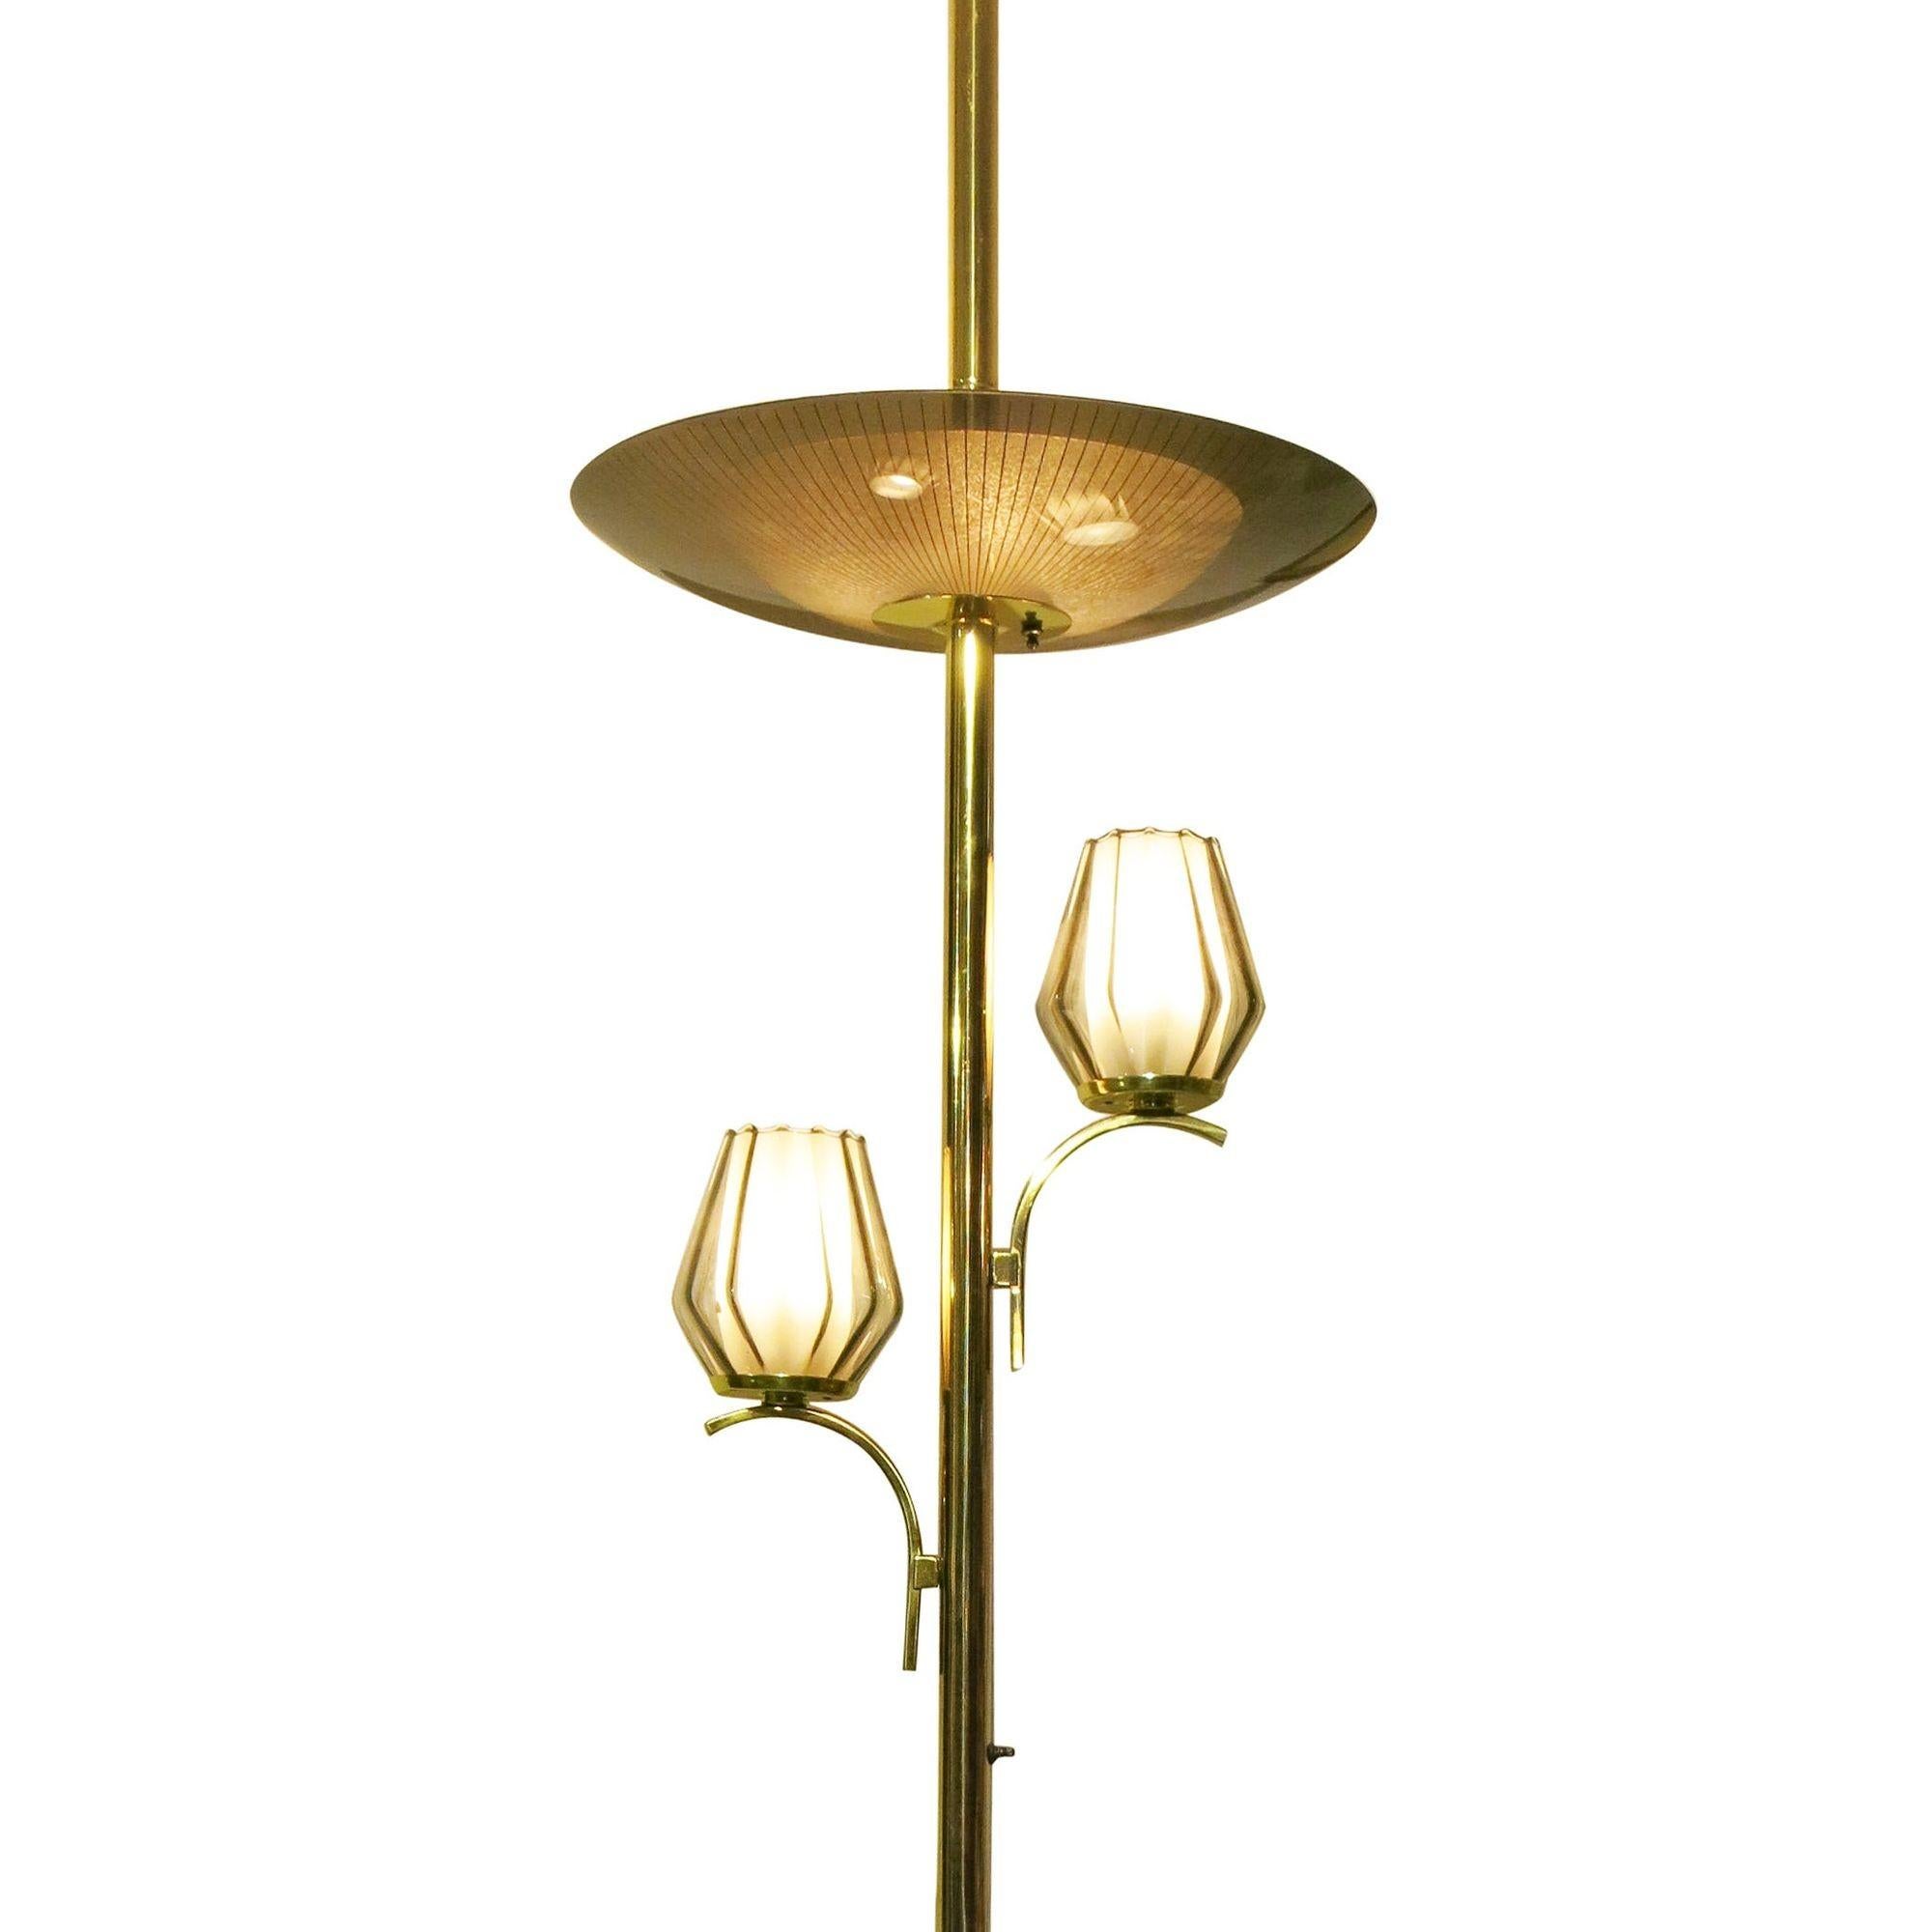 Mid-century brass triple light floor-to-ceiling tension pole lamp with a heavy Googie style. This lamp features a unique tension pole lamp with an adjustable brass pole that is adjustable to the size of your ceiling (95